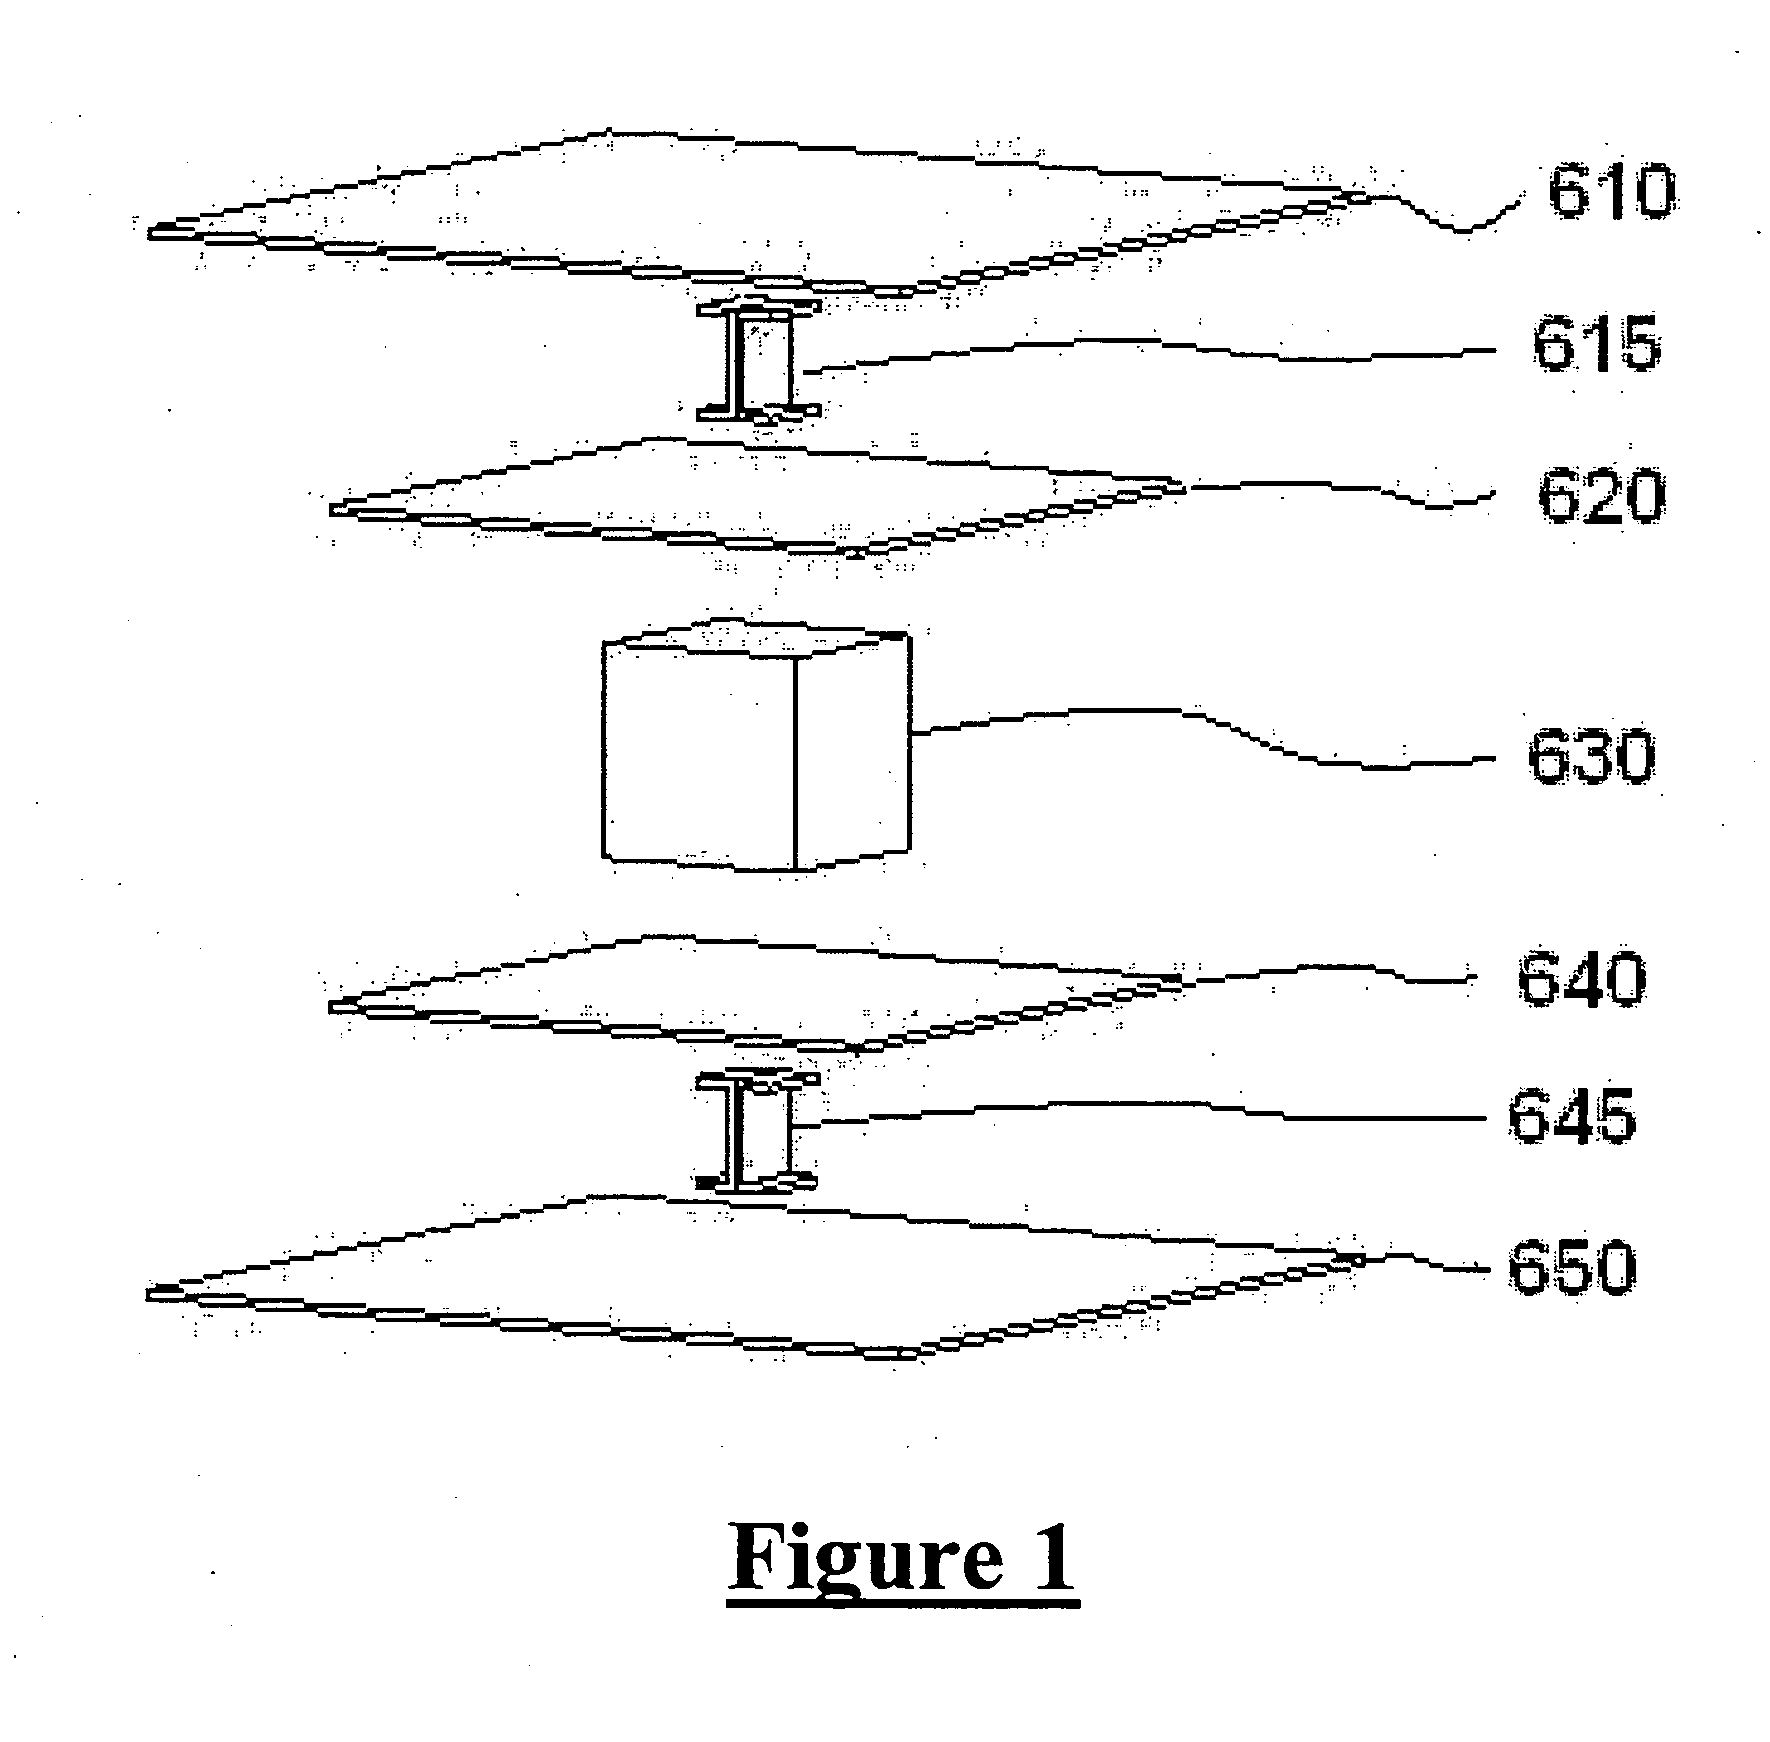 Packaging device and method